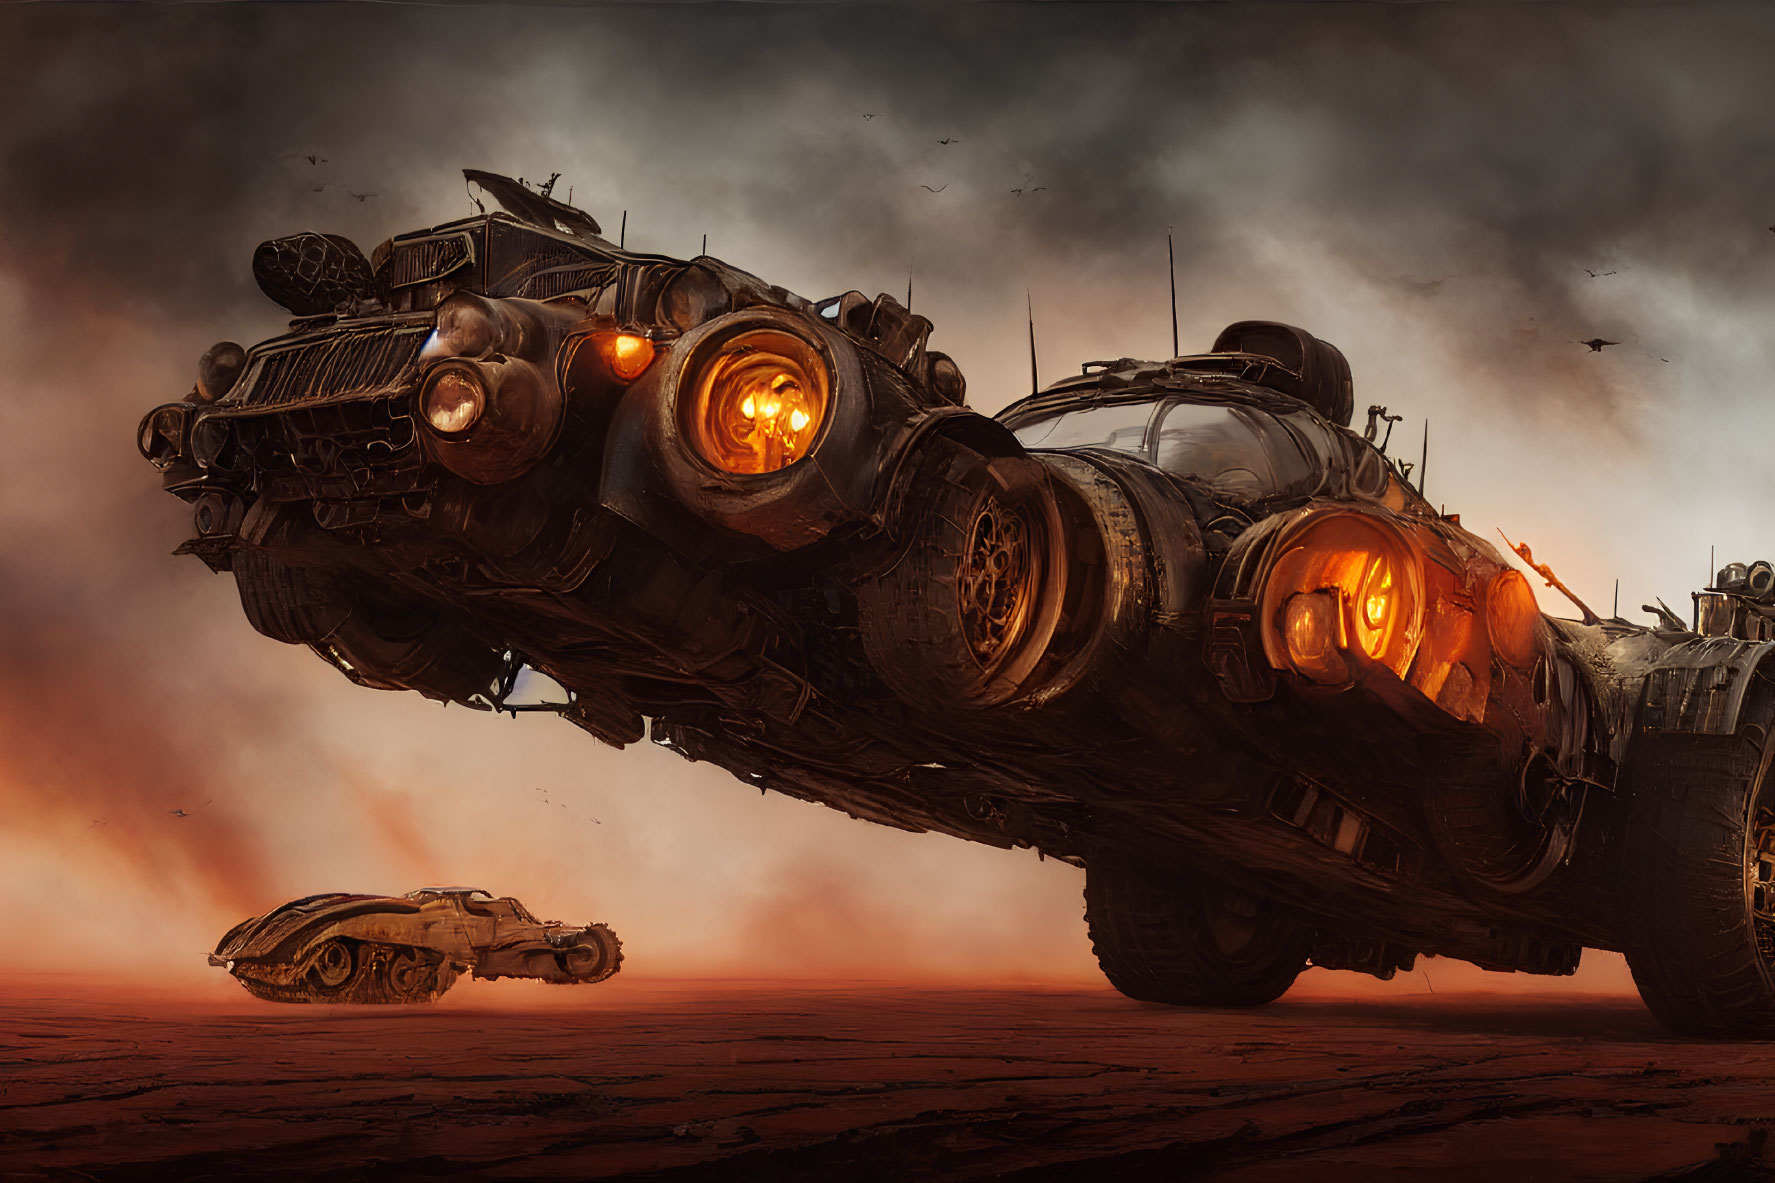 Armored vehicles flying in apocalyptic landscape with fiery sky